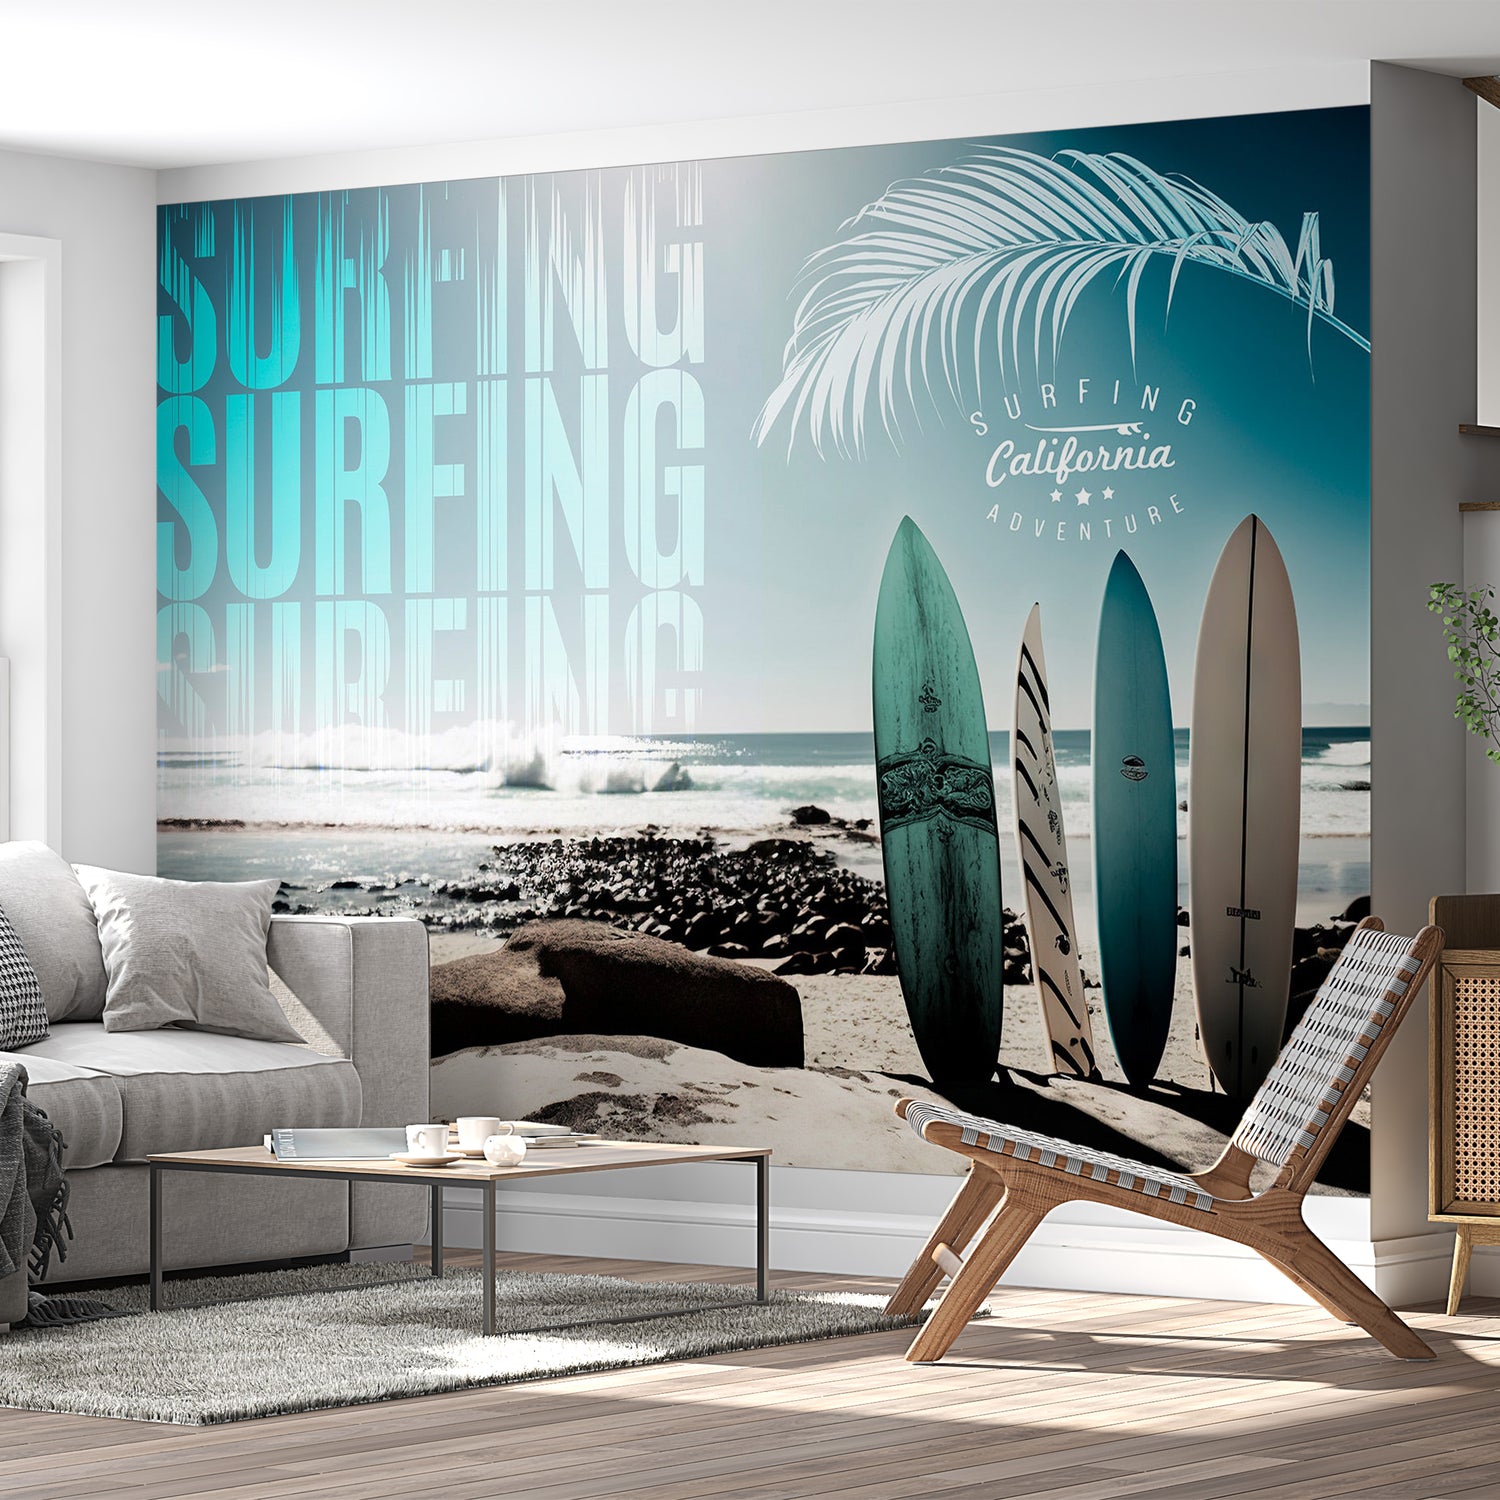 Peel & Stick Surf Wall Mural - California Surfing Adventure - Removable Wall Decals